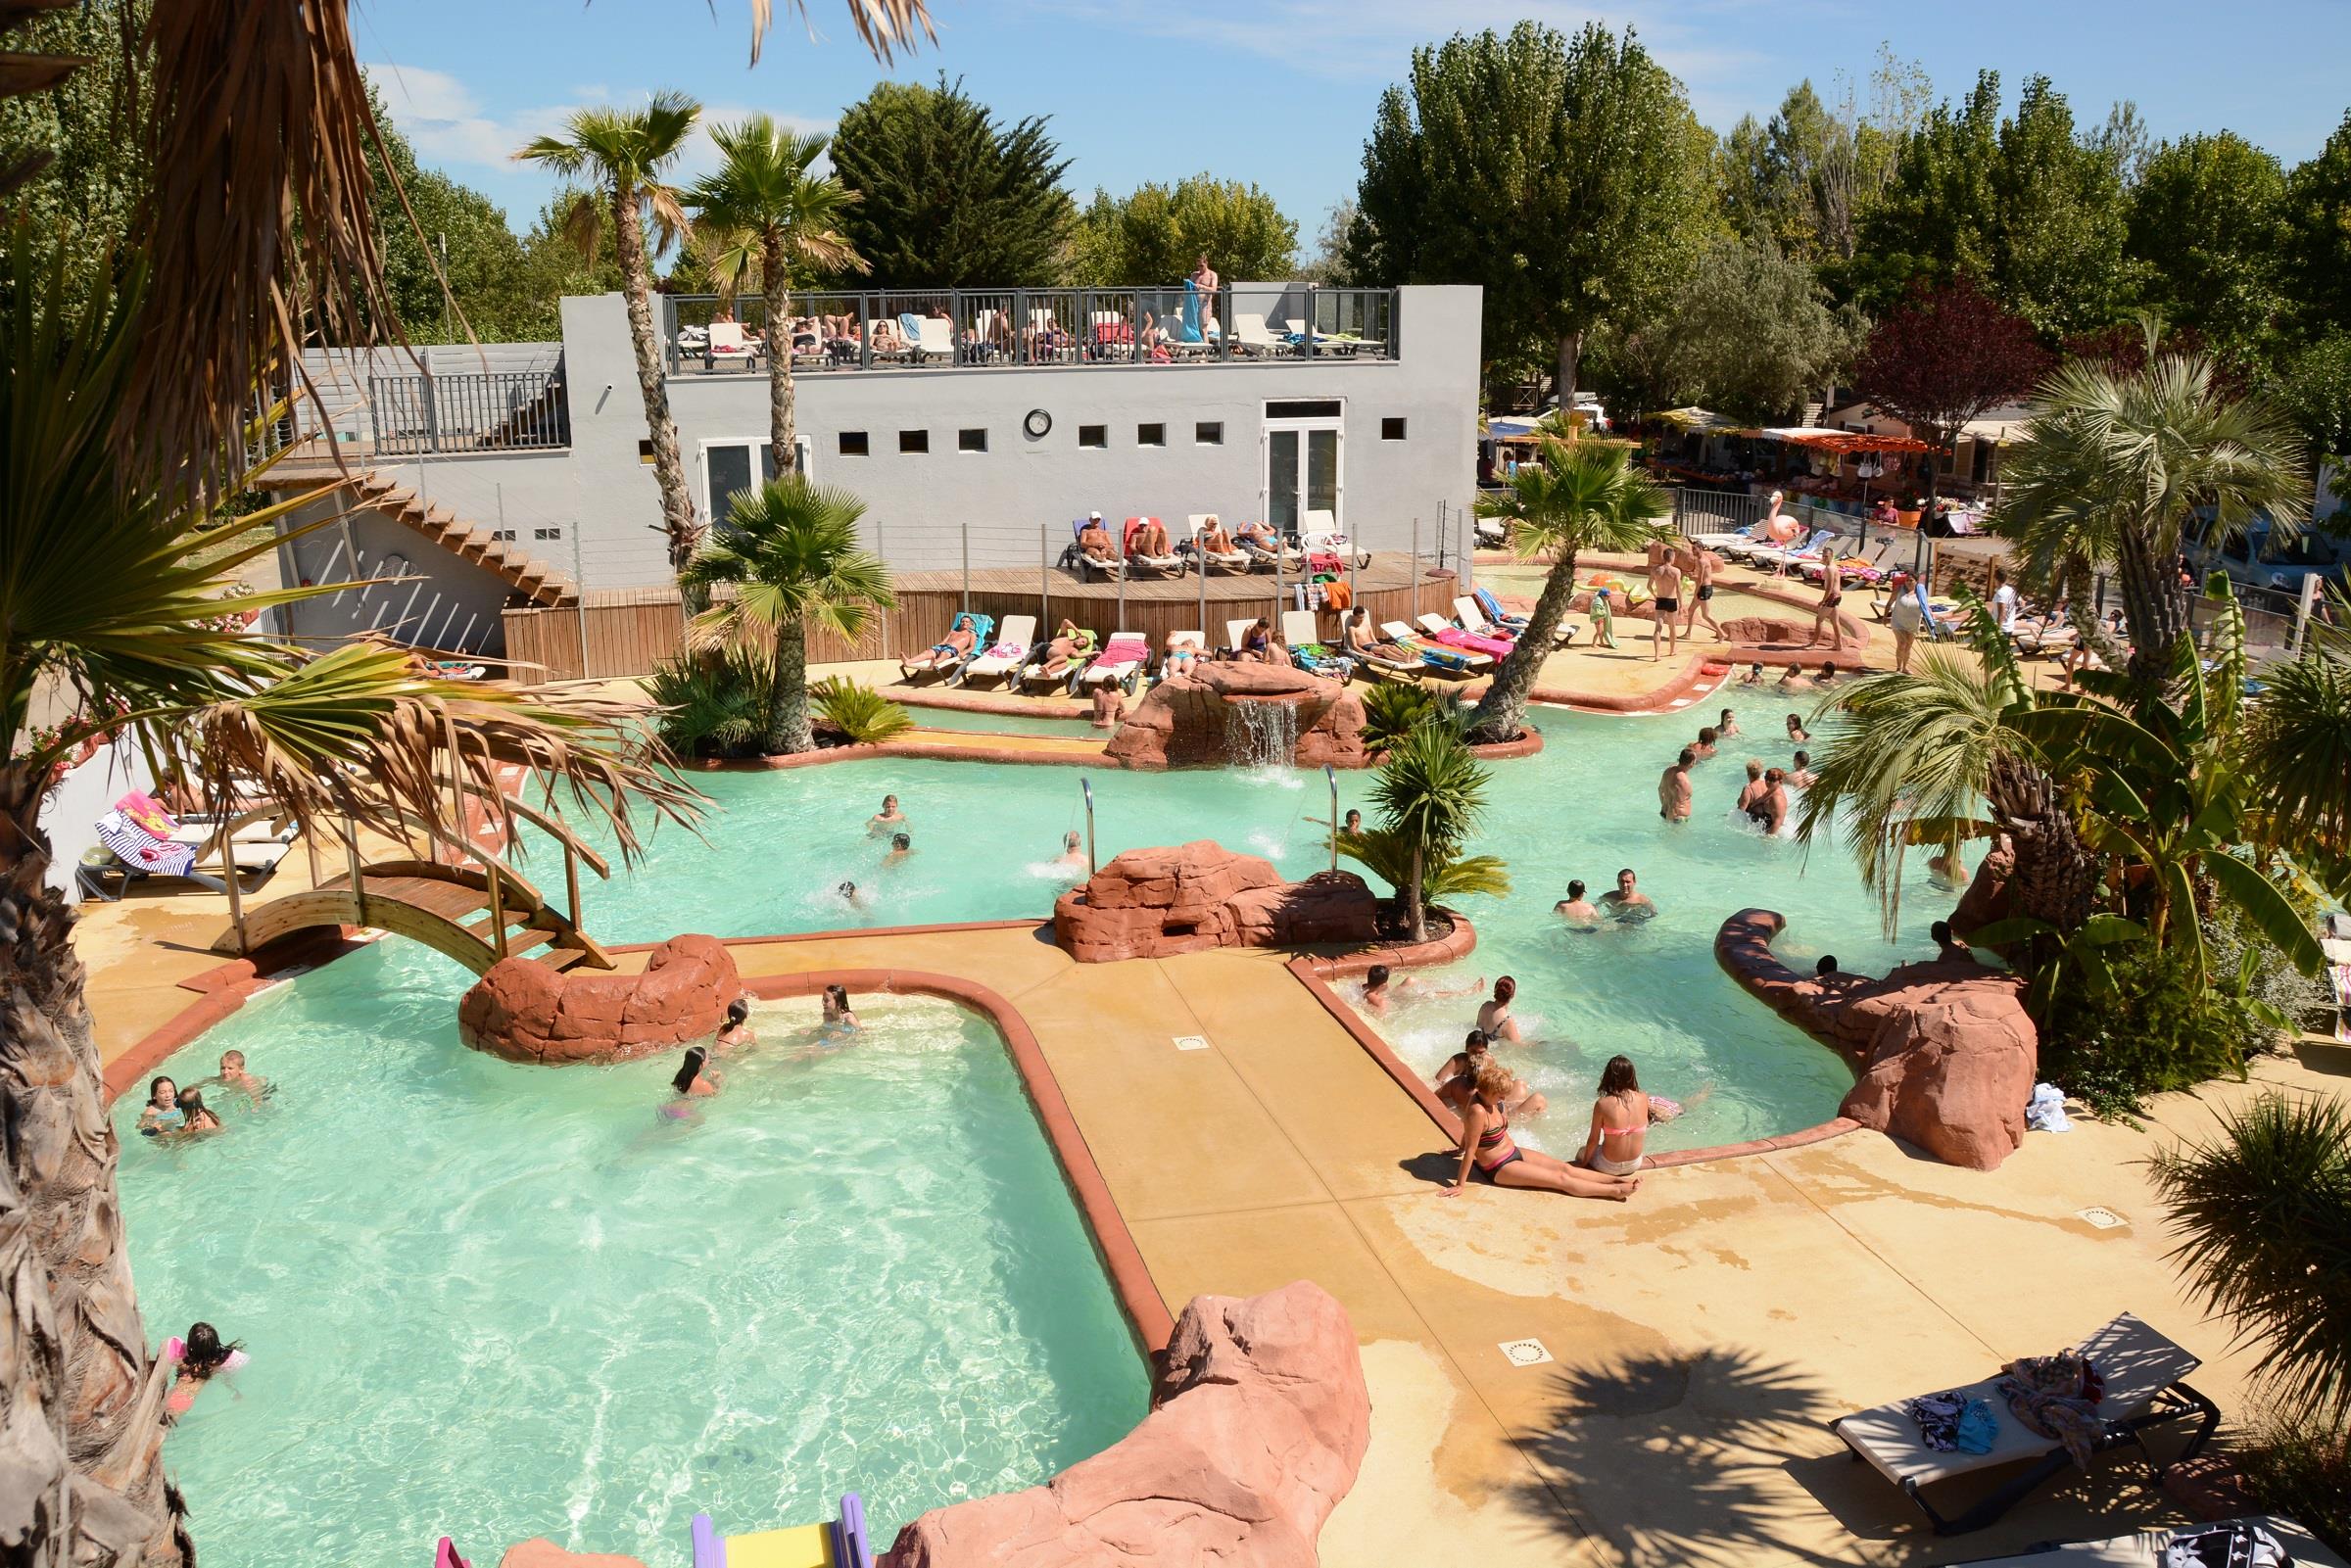 Camping L'Oasis Palavasienne - Occitania